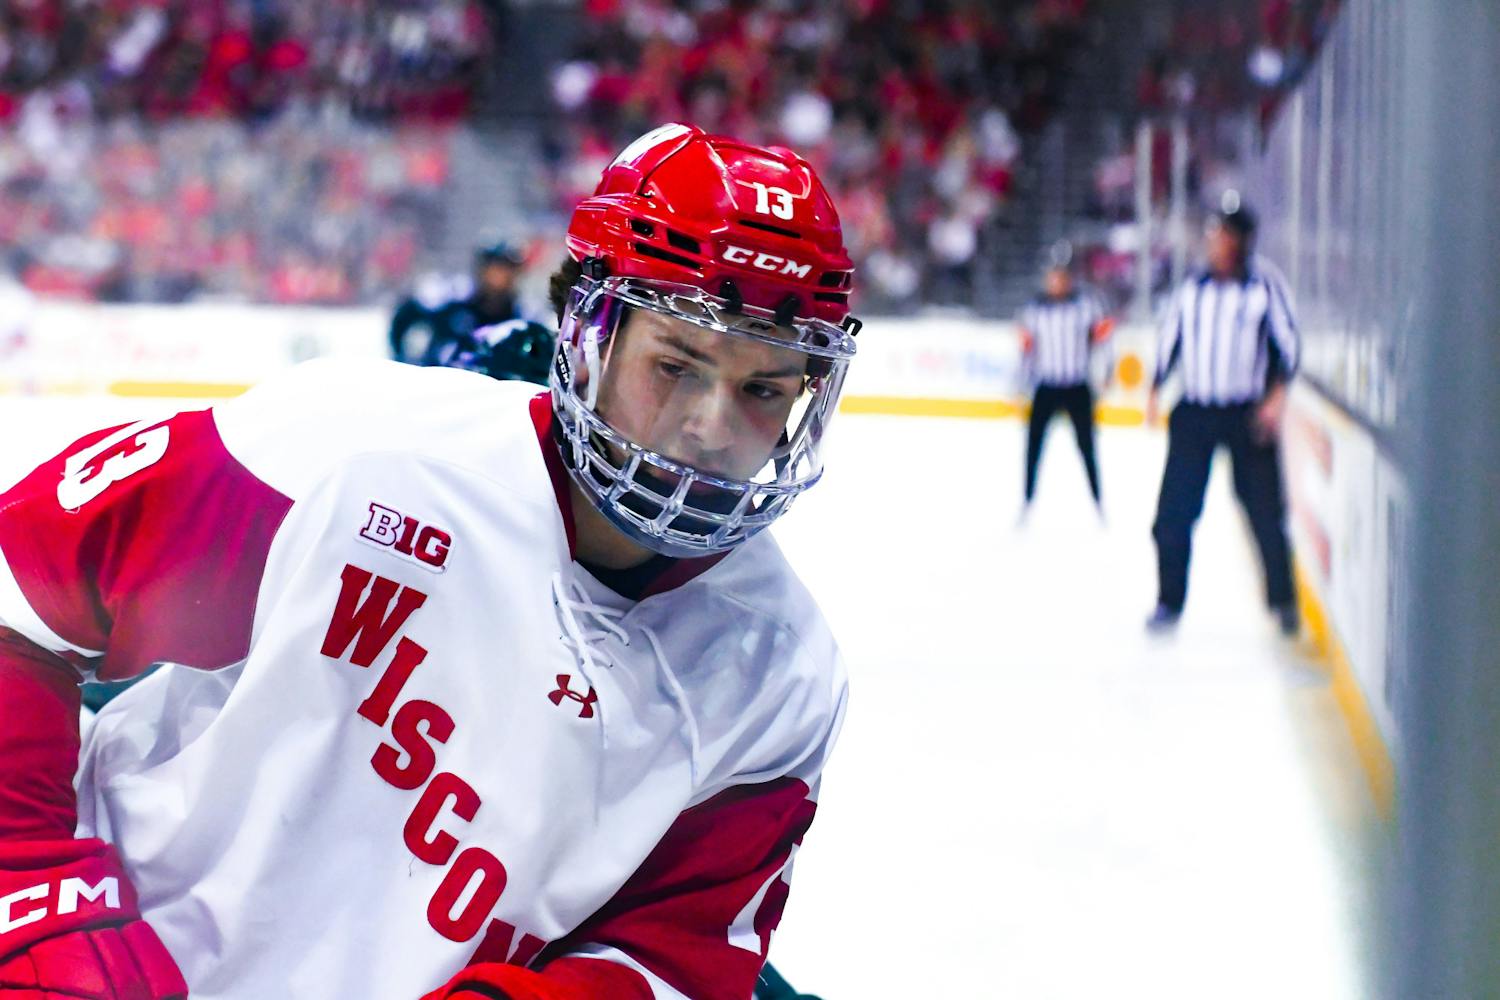 PHOTOS: Wisconsin Mens Hockey back for revenge on night two against MSU